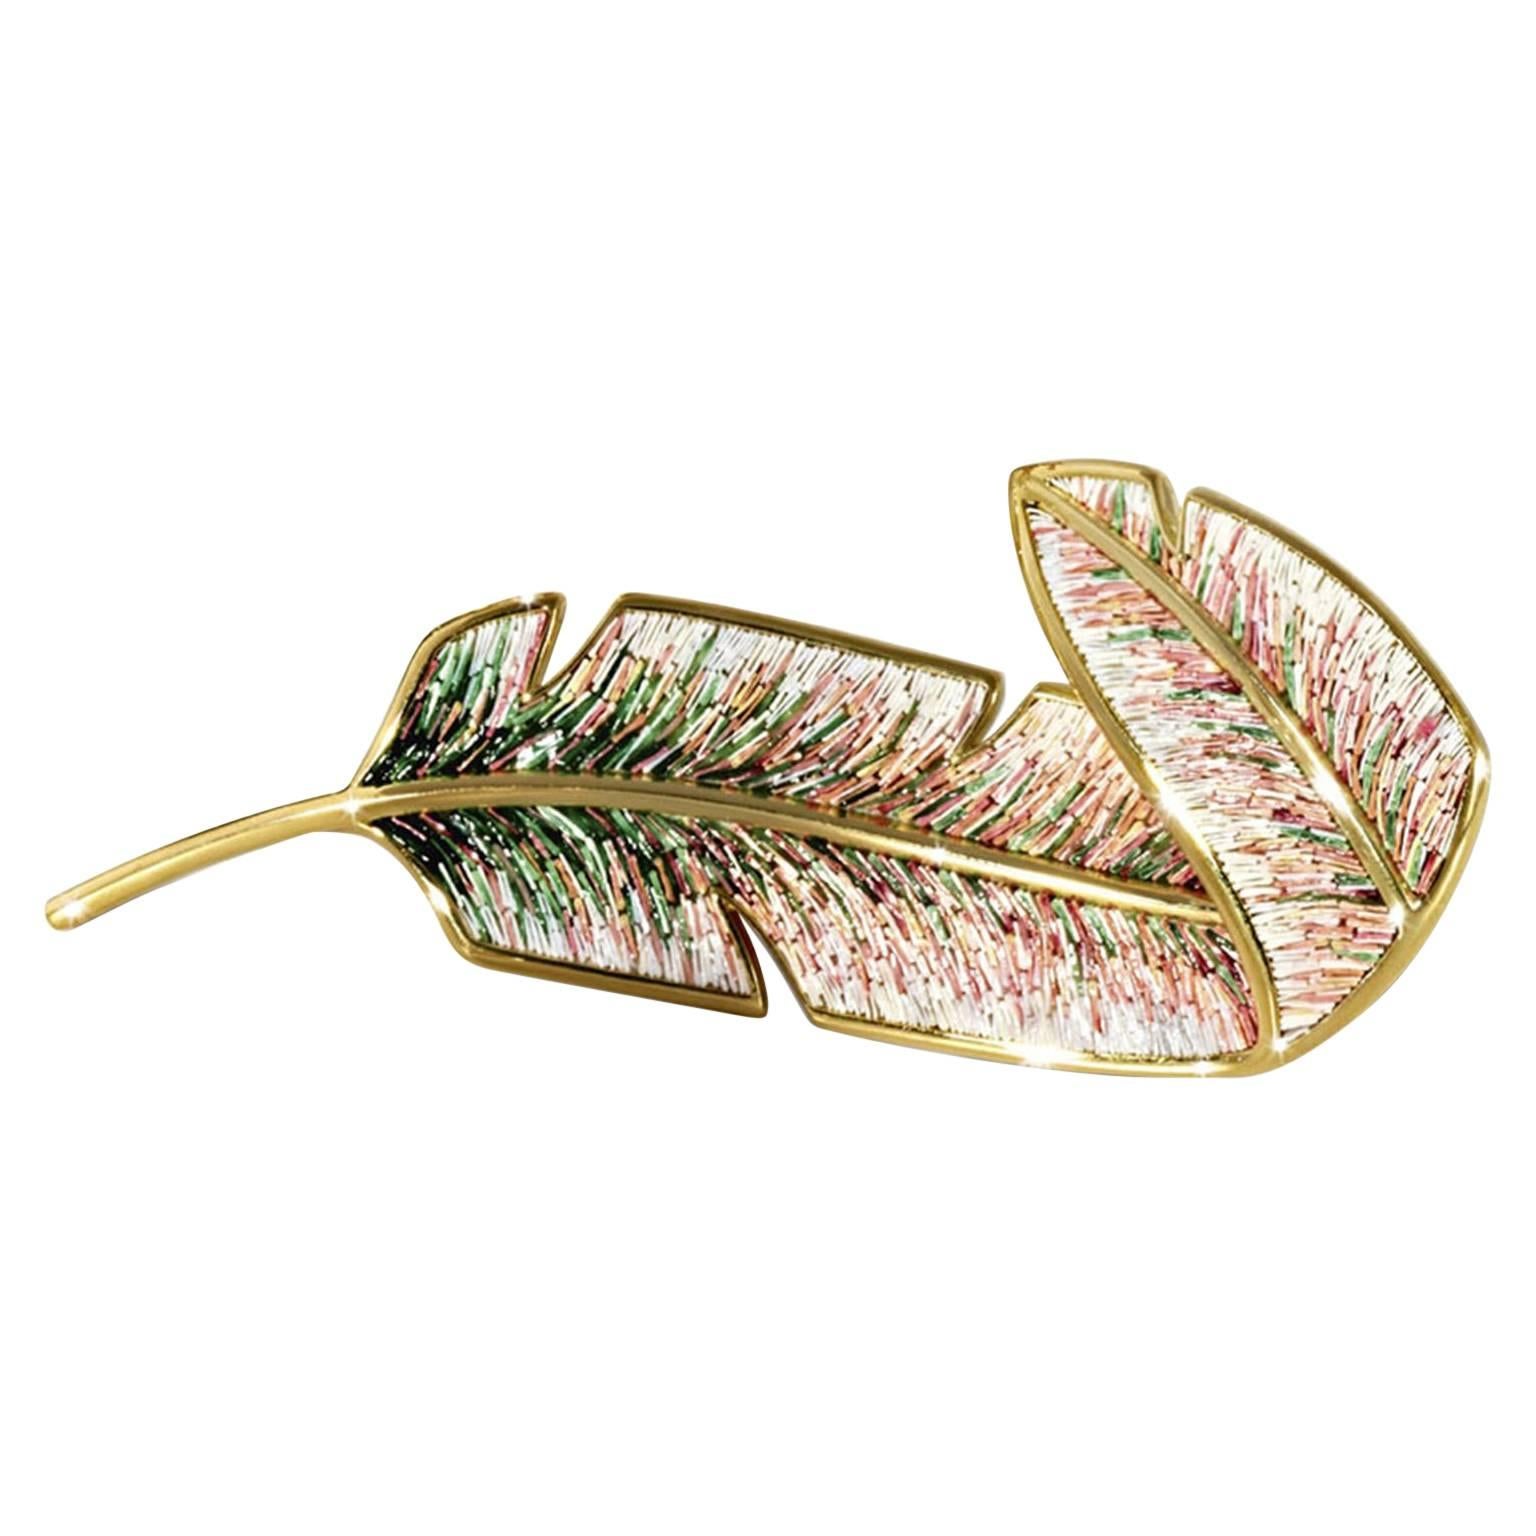 Stylish Brooch Designed by Rogers Thomas Gold and Micromosaic